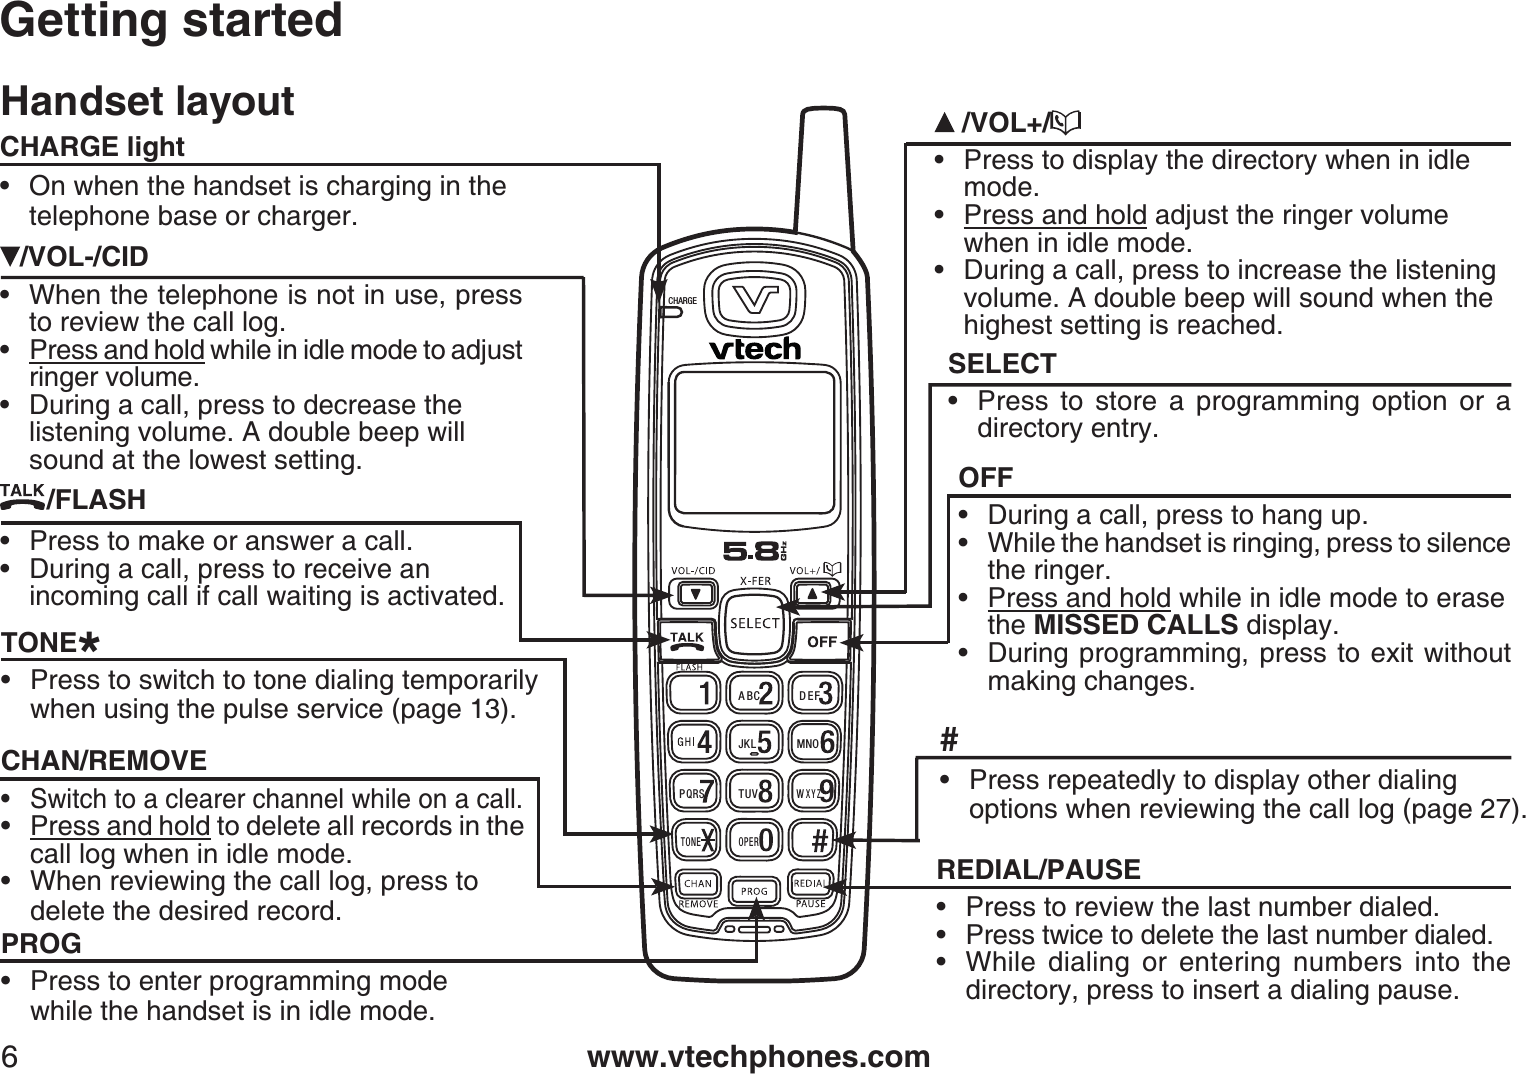 www.vtechphones.com6Handset layoutGetting started/VOL-/CID• When the telephone is not in use, press to review the call log.• Press and hold while in idle mode to adjust ringer volume. • During a call, press to decrease the listening volume. A double beep willsound at the lowest setting.PROG• Press to enter programming mode while the handset is in idle mode./FLASH• Press to make or answer a call.• During a call, press to receive an incoming call if call waiting is activated.CHAN/REMOVE• Switch to a clearer channel while on a call.• Press and hold to delete all records in the call log when in idle mode. When reviewing the call log, press to   delete the desired record.•/VOL+/• Press to display the directory when in idlemode.• Press and hold adjust the ringer volume when in idle mode. • During a call, press to increase the listeningvolume. A double beep will sound when the highest setting is reached.CHARGEOPERDEFJKLPQRSWXYZTUVMNOTONEABCSELECT• Press to store a programming option or a directory entry.OFF• During a call, press to hang up.• While the handset is ringing, press to silence the ringer.•Press and hold while in idle mode to erase the MISSED CALLS display.• During programming, press to exit withoutmaking changes.REDIAL/PAUSE• Press to review the last number dialed.• Press twice to delete the last number dialed.• While dialing or entering numbers into the directory, press to insert a dialing pause.CHARGE light• On when the handset is charging in the telephone base or charger.TONE*• Press to switch to tone dialing temporarilywhen using the pulse service (page 13). #• Press repeatedly to display other dialingoptions when reviewing the call log (page 27).